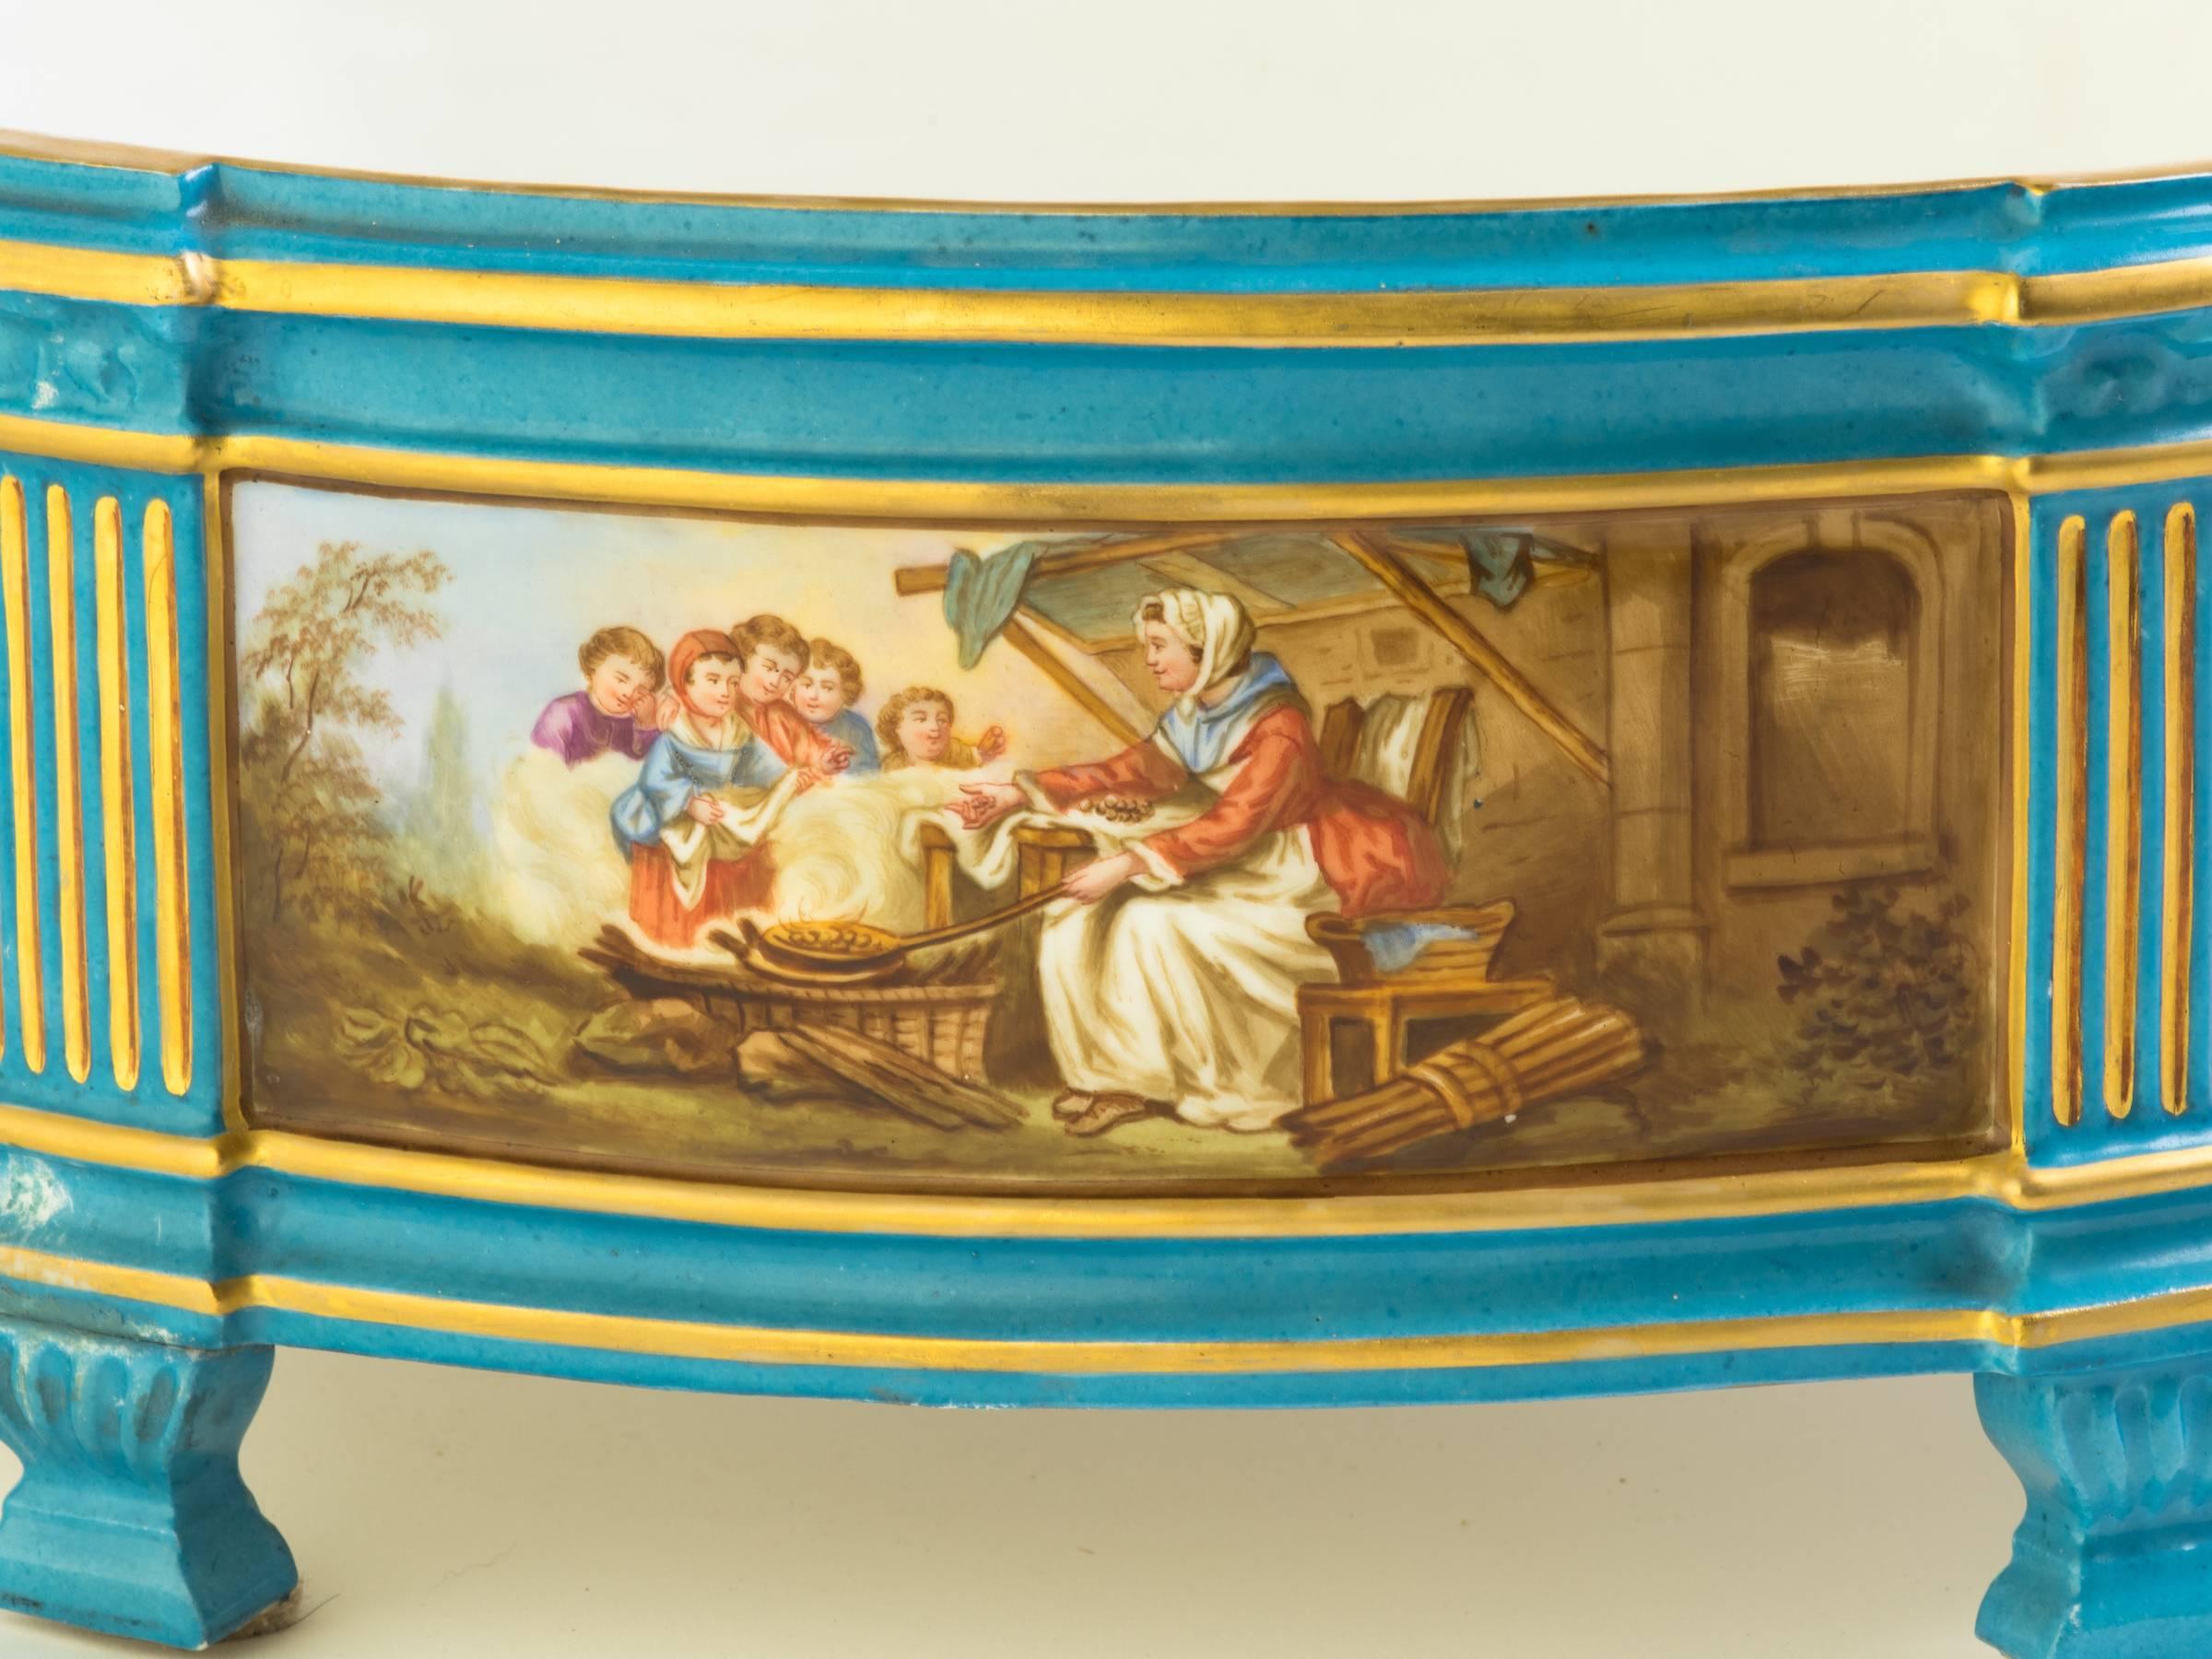 19th century French hand-painted porcelain centerpiece with old staple repairs.